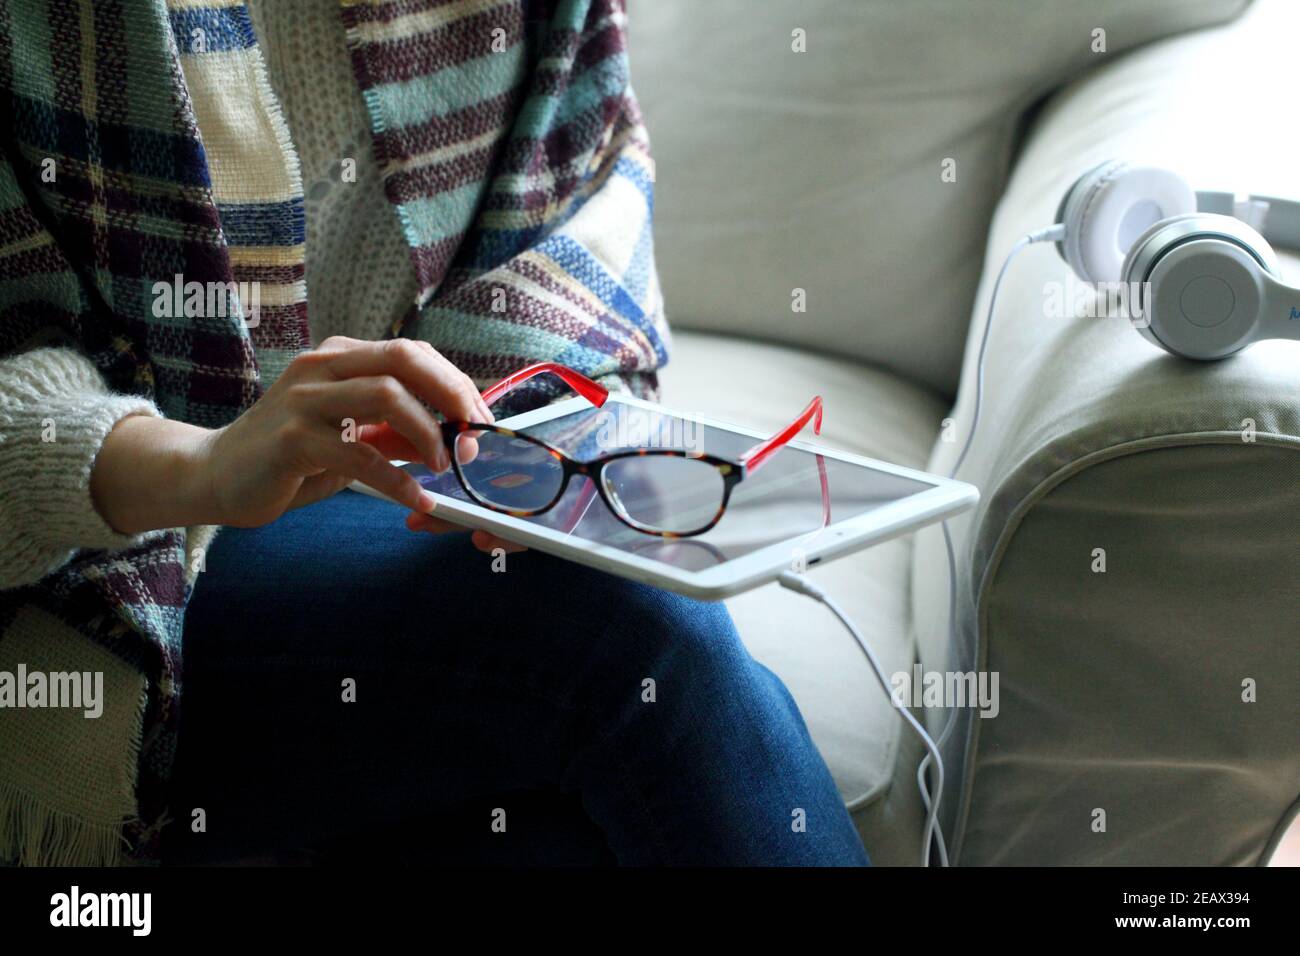 Closeup shot of a woman sitting with headphones on the couch and holding glasses next to a tablet Stock Photo